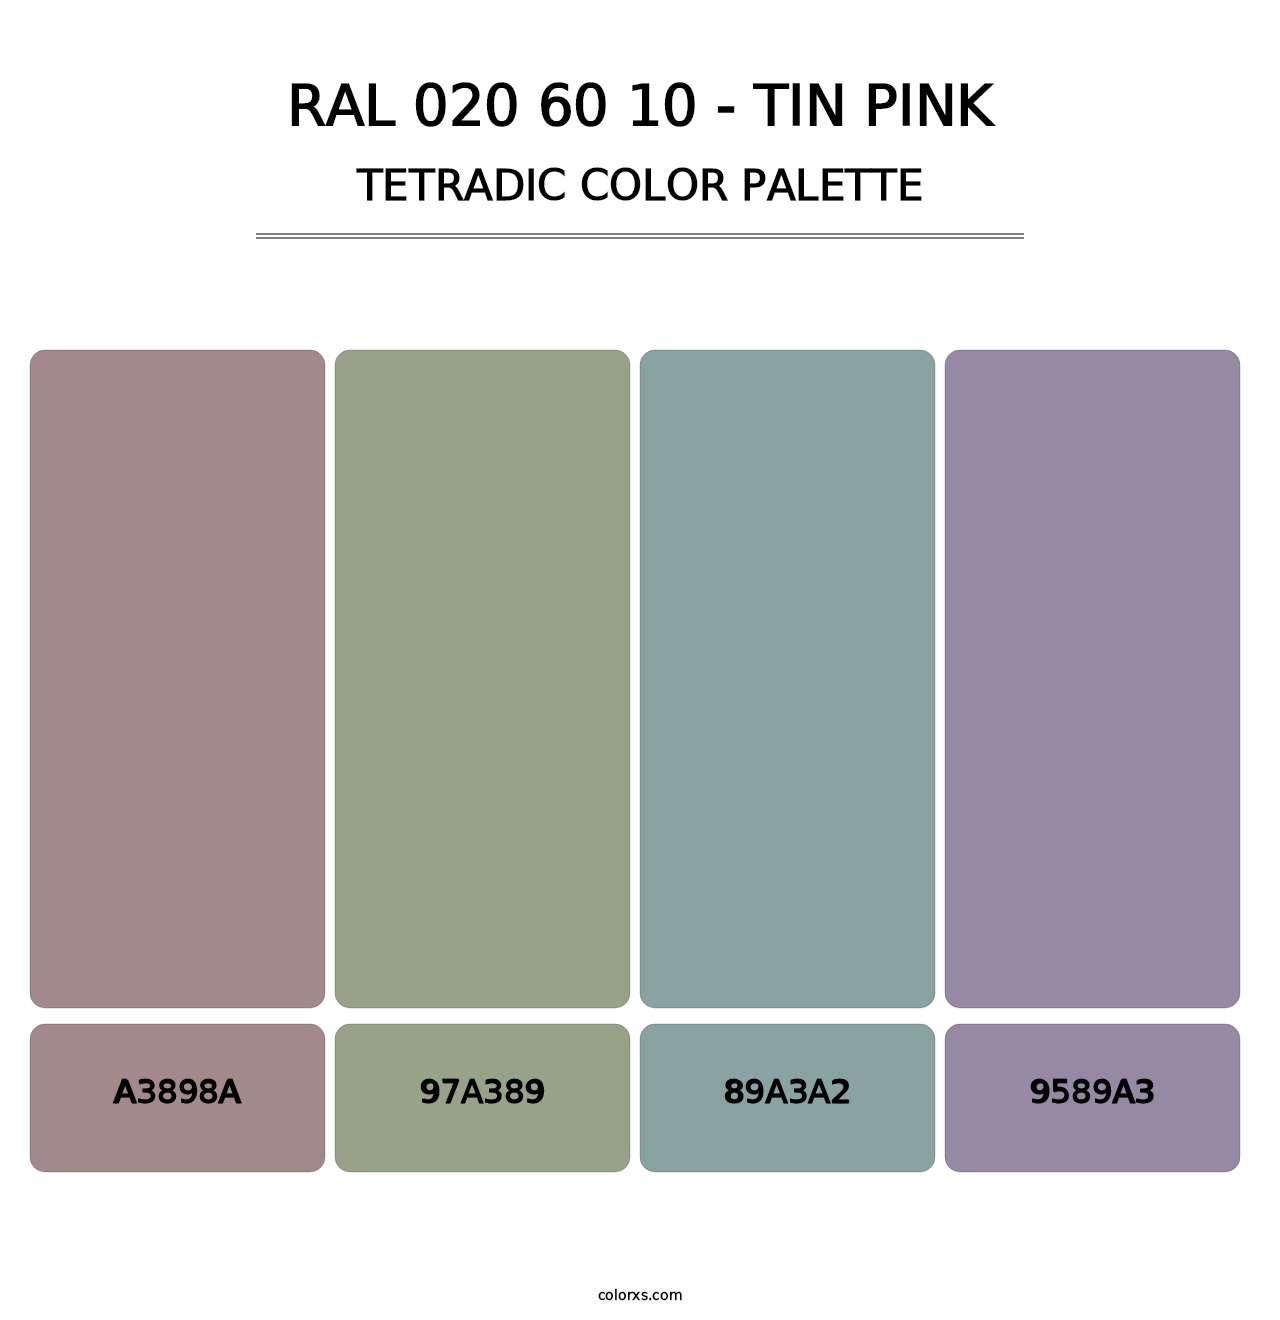 RAL 020 60 10 - Tin Pink - Tetradic Color Palette